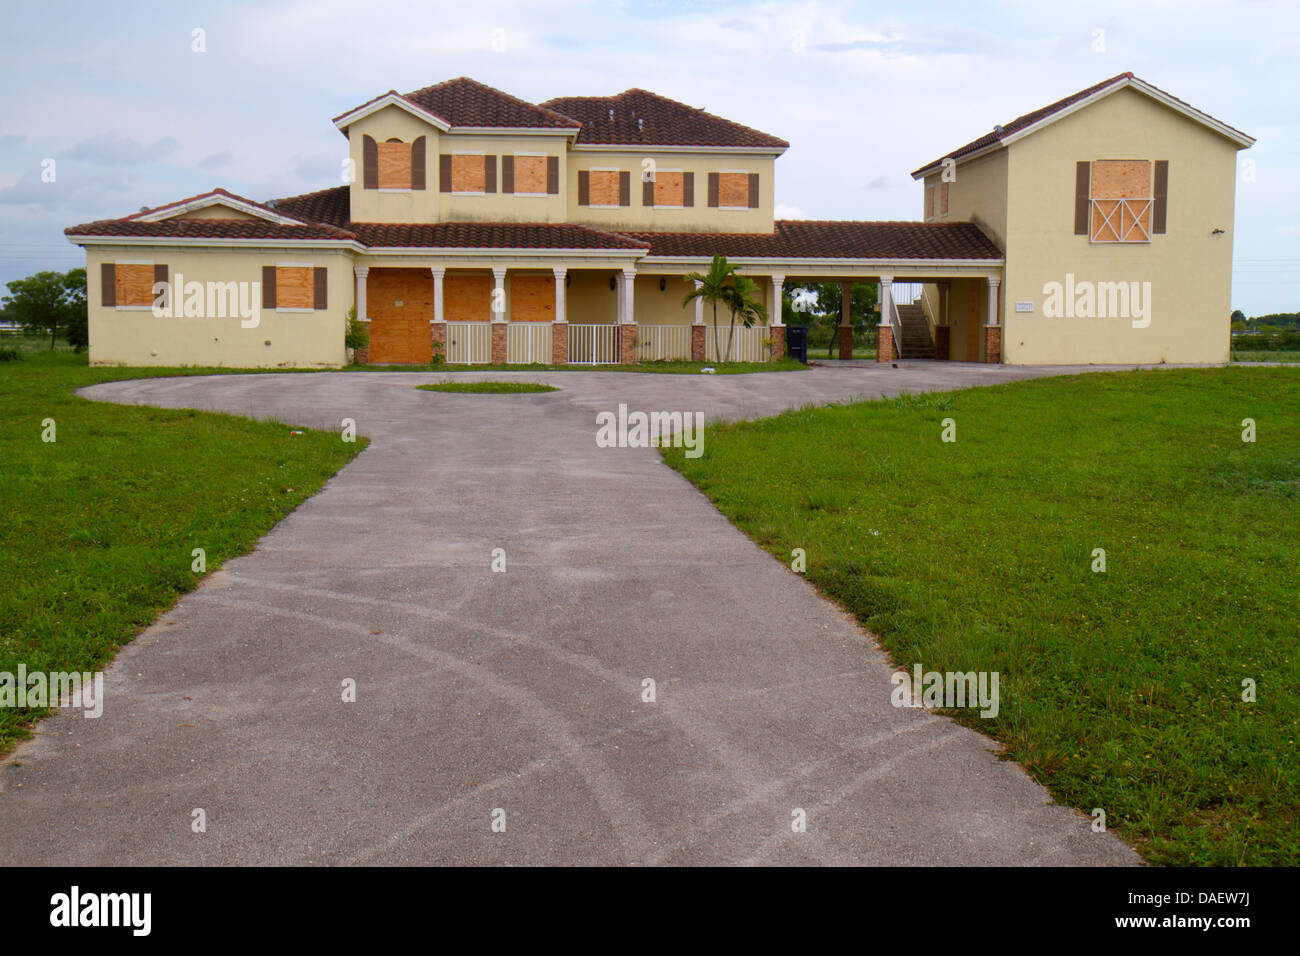 Miami Florida,Homestead,Redland,mansion,house home houses homes residence,home,residence,boarded up,vacant,abandoned,empty,crisis,bubble,financial,for Stock Photo